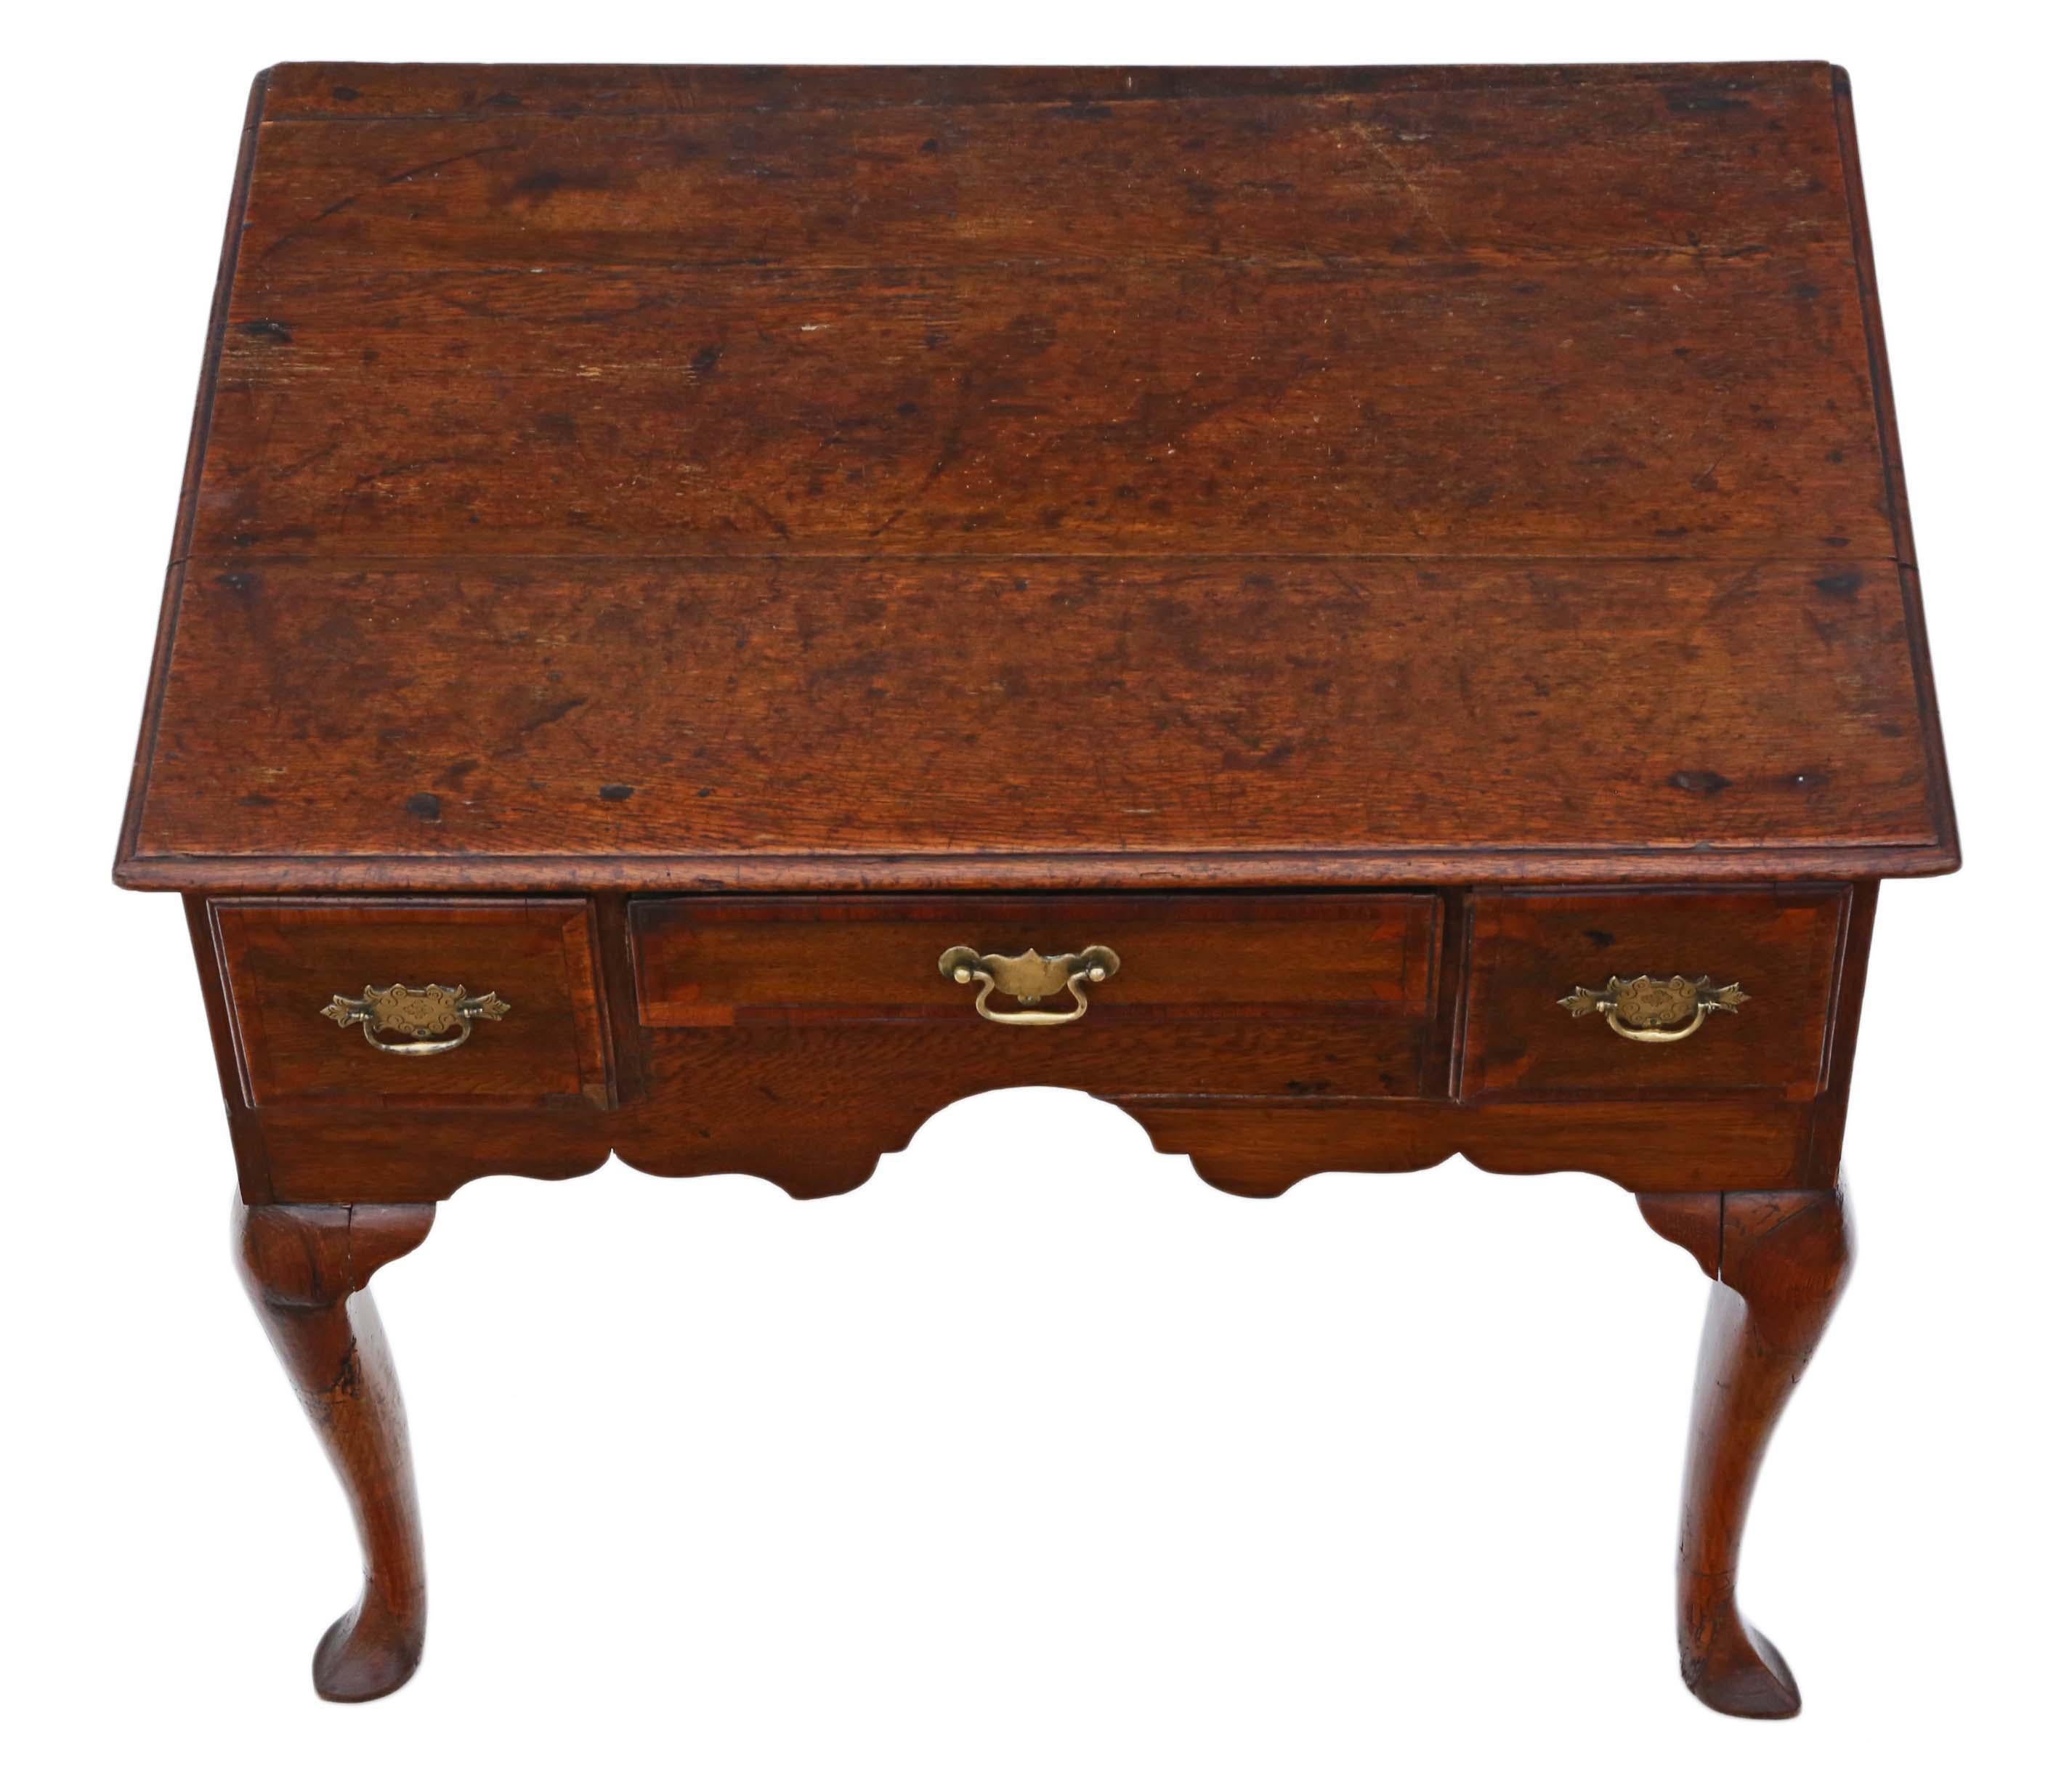 Antique Georgian mahogany crossbanded oak lowboy side table, circa 1760.
No loose joints. Full of age, character and charm. The drawers slide freely.
Would look great in the right location! A charming, characterful piece.
Overall maximum